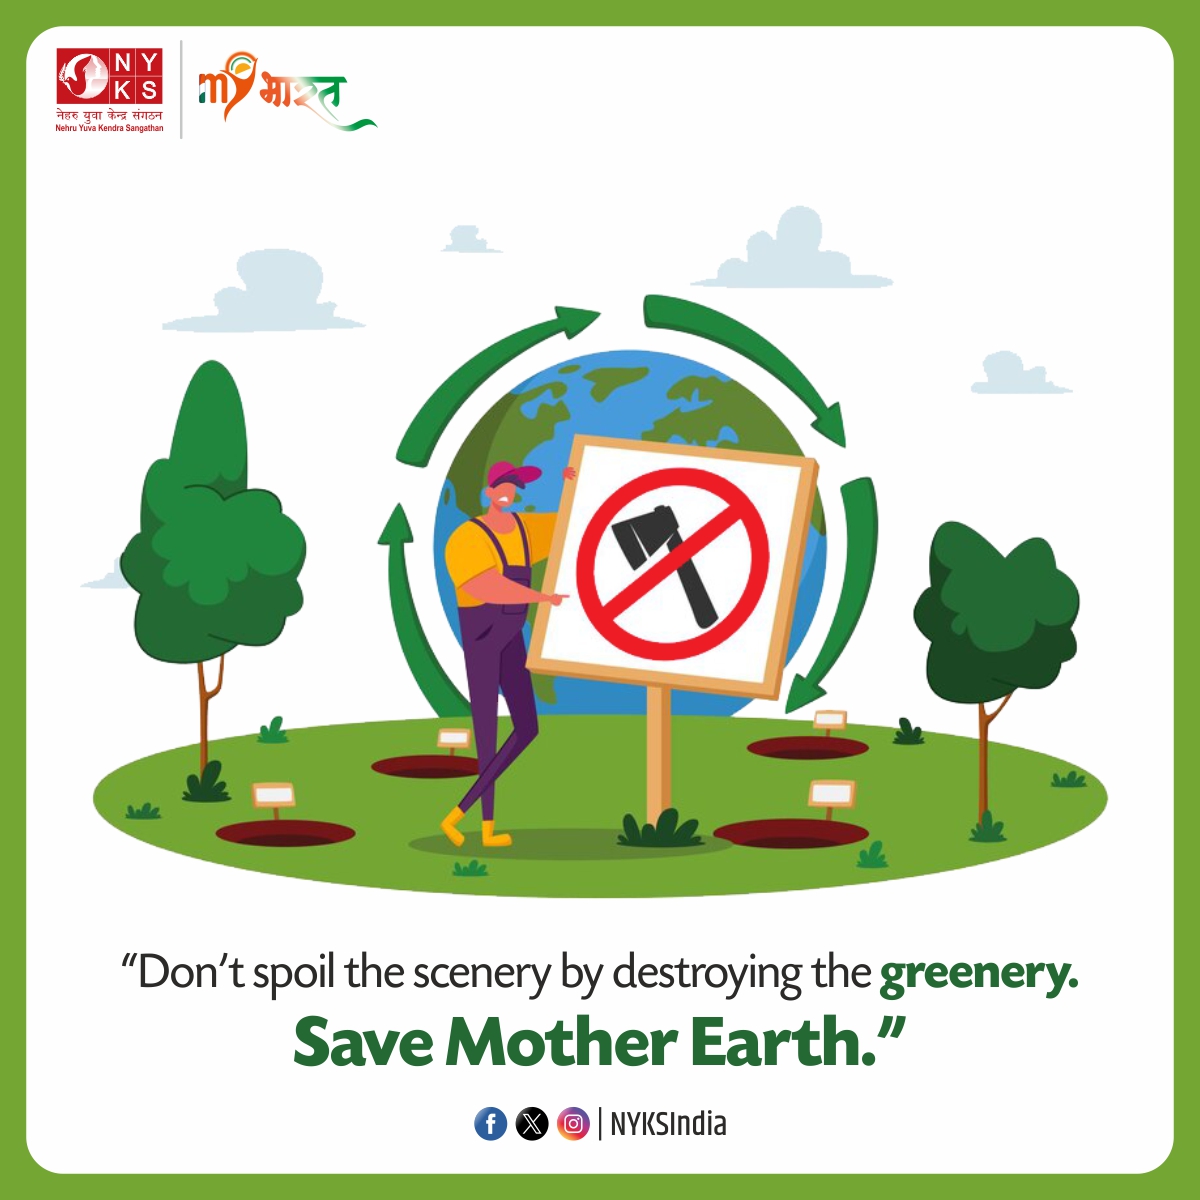 Let's preserve the beauty of our surroundings by nurturing nature's green embrace. 🌿💚 Save Mother Earth. 

#GreenEarth #NaturePreservation #SaveTrees #NYKS